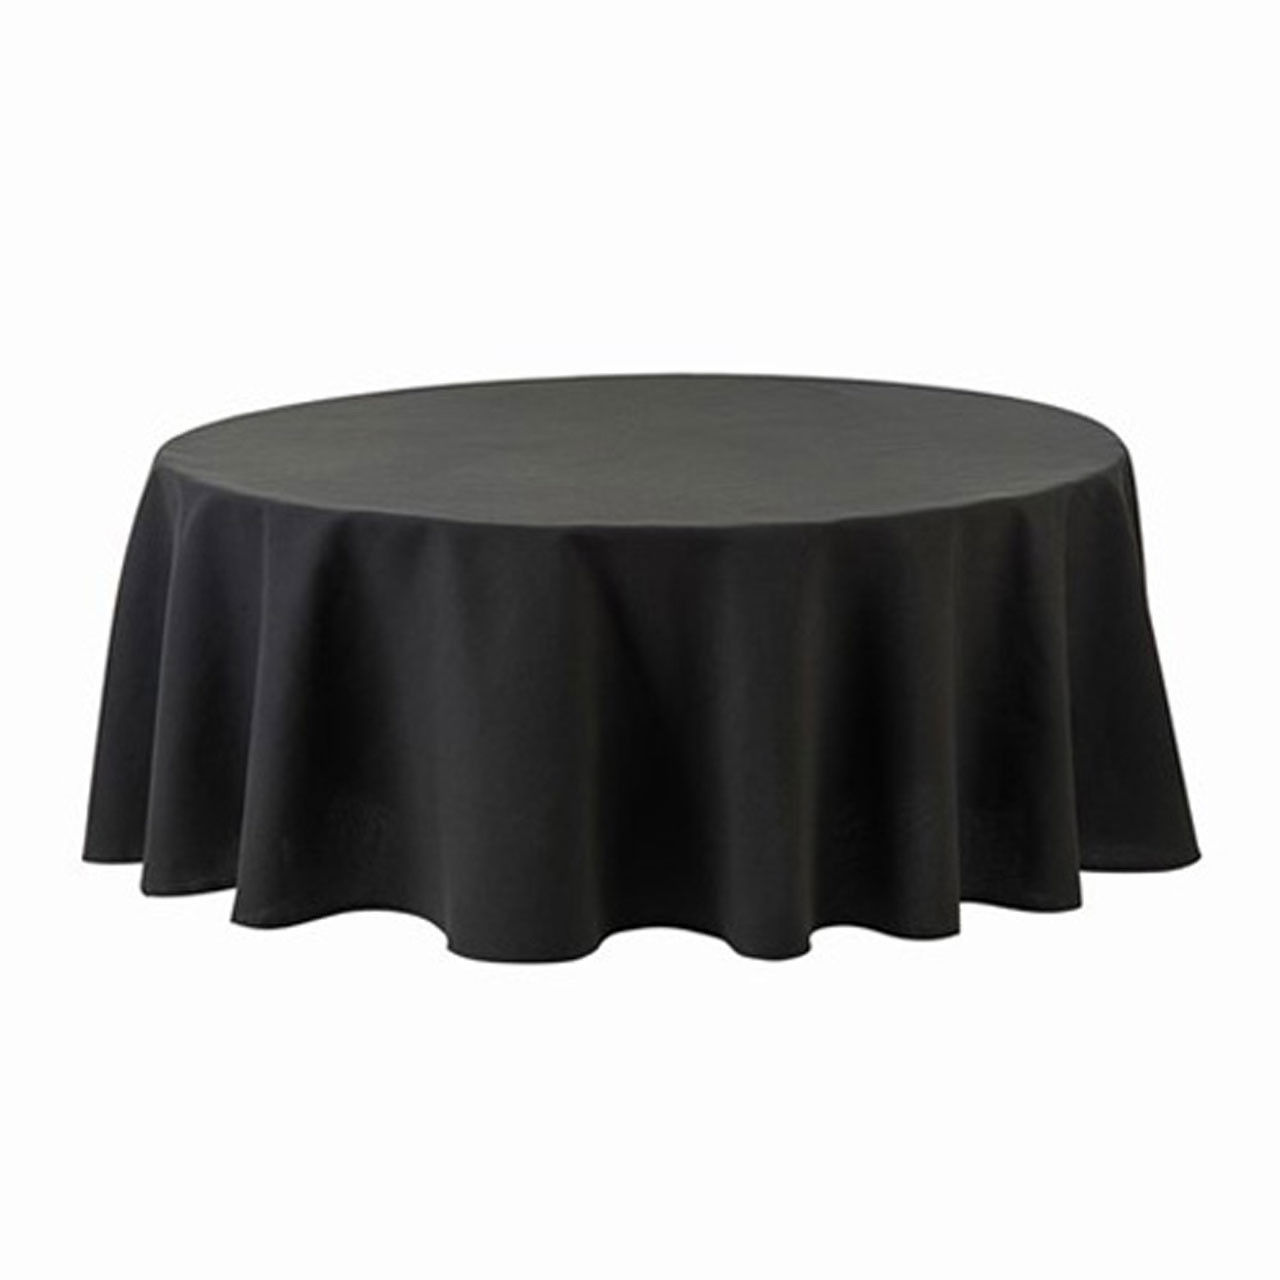 Is the fabric heavy for this black round tablecloth?